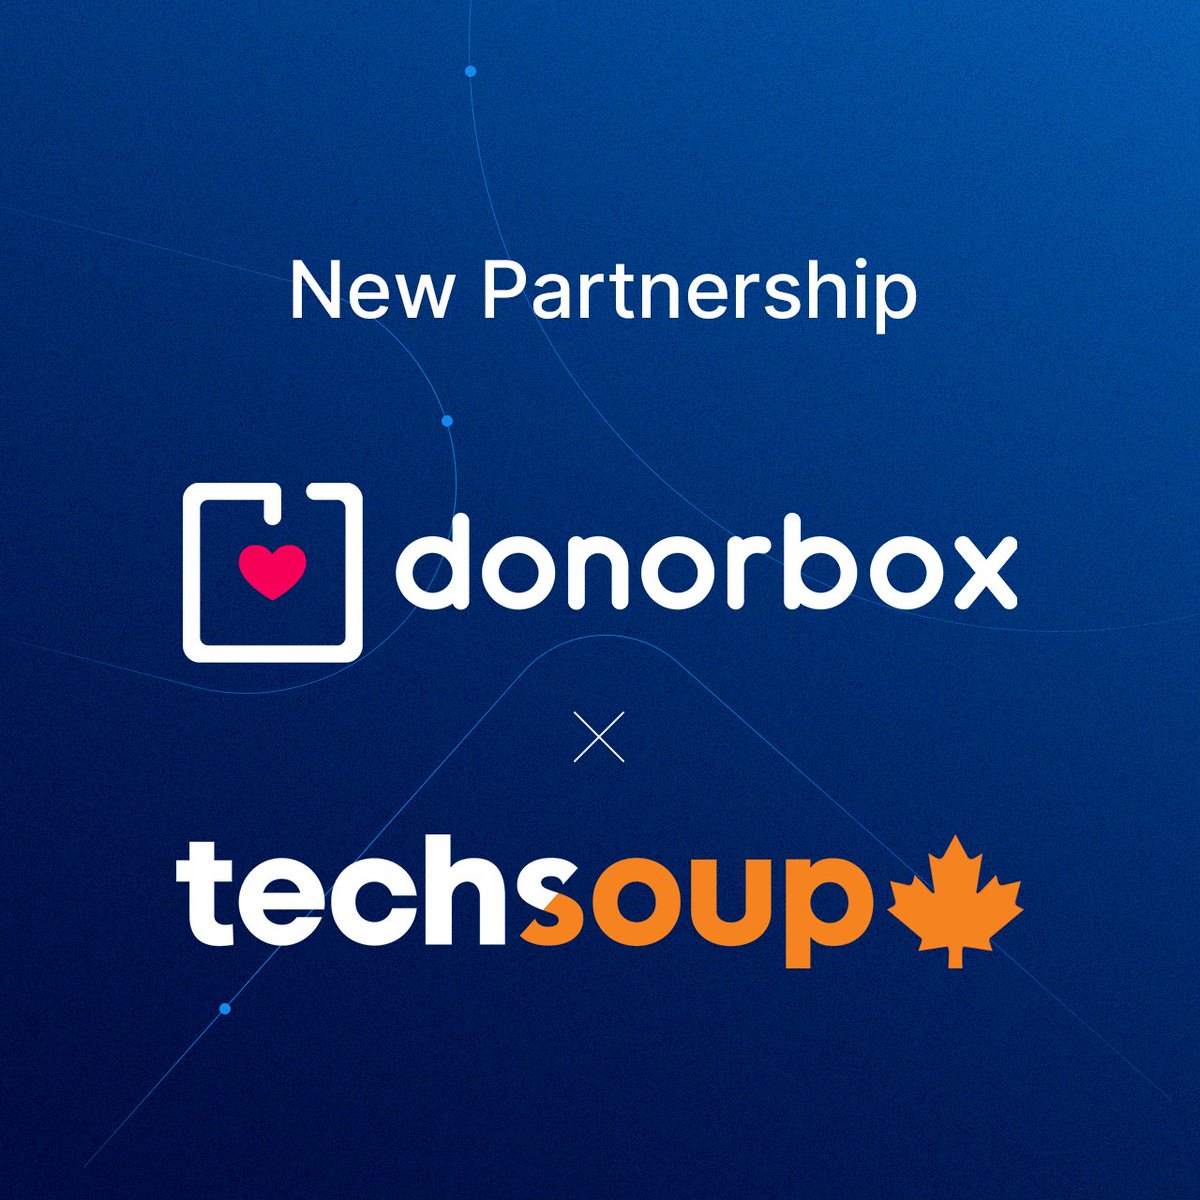 Great news for Canadian Nonprofits! Sign up with Donorbox through @techsoupcanada and save 30% on any plan for 3 years. It's the perfect time to leverage tech for good. Act now: ➡️techsoup.ca/content/donorb… #Donorbox #DonorboxDiscount #TechForGood #TechSoup #Canada #Nonprofits…